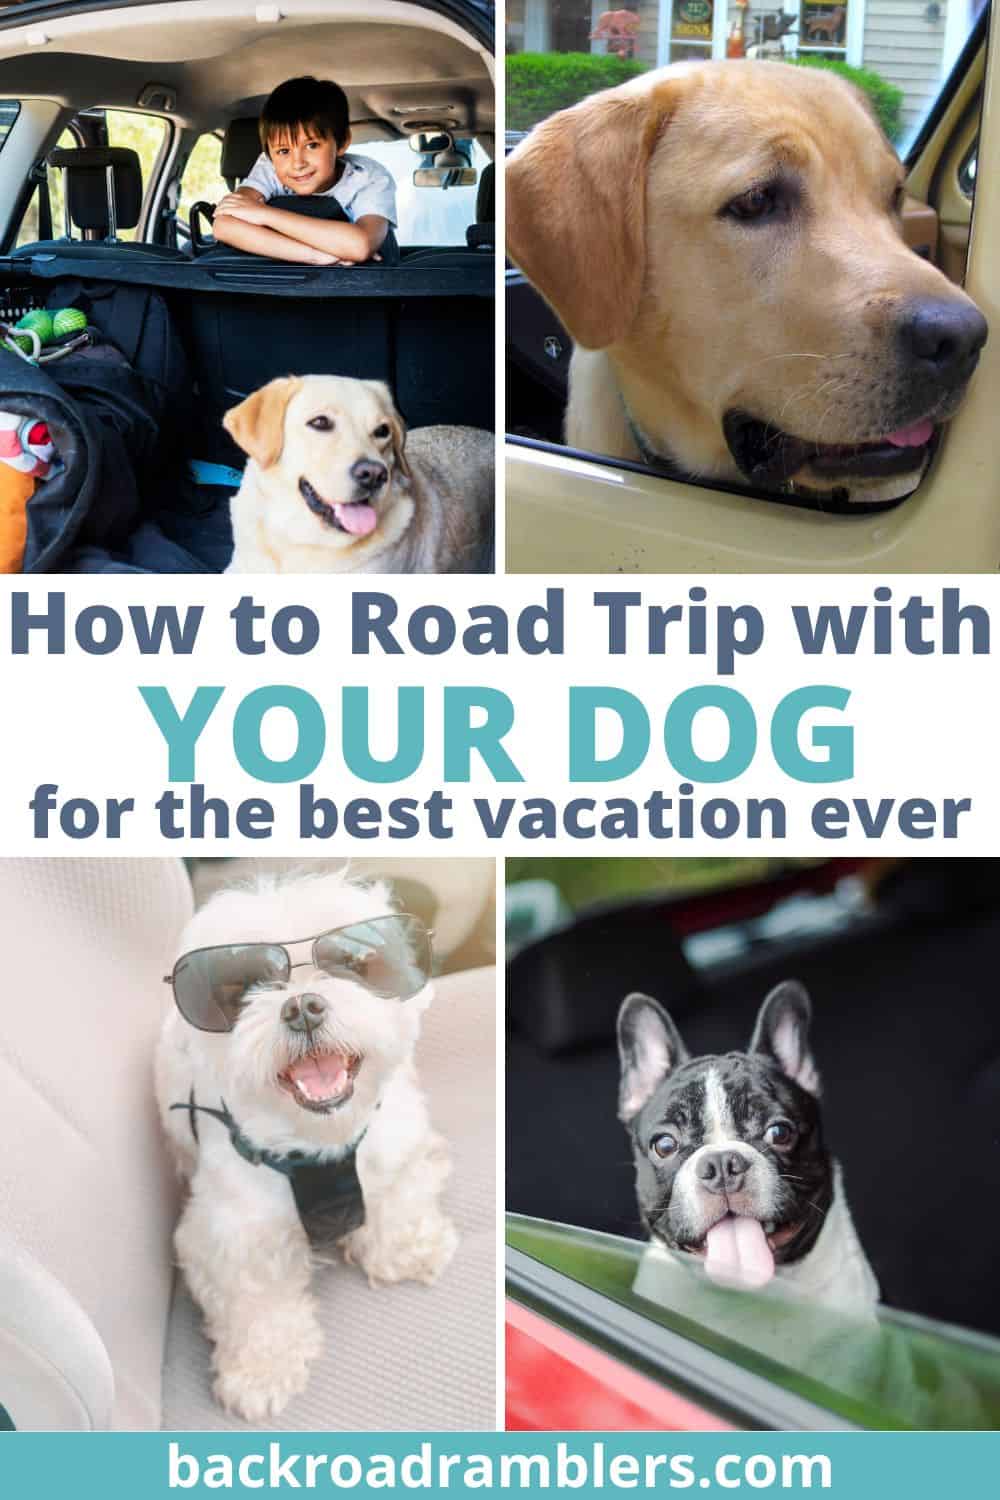 A collage of photos featuring ra oad trip with dogs. Text overlay: How to road trip with your dog for the best vacation ever. .